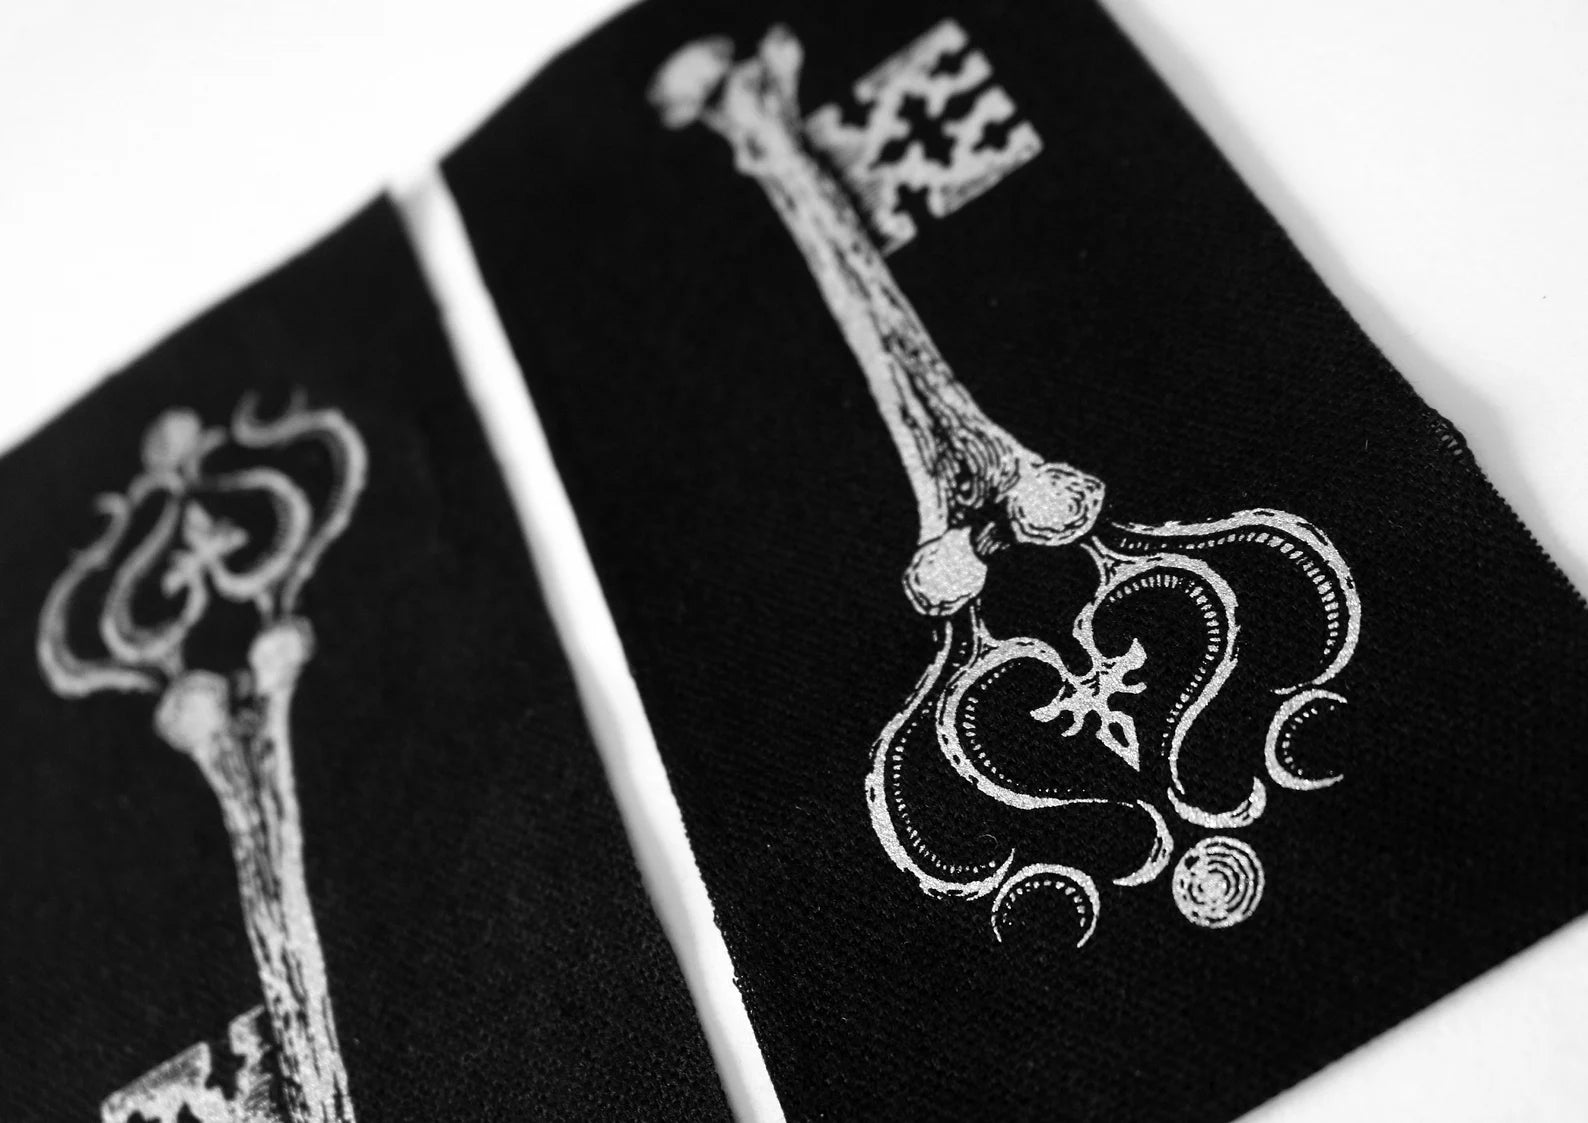 "Hecate's Key" Screen Printed Patch